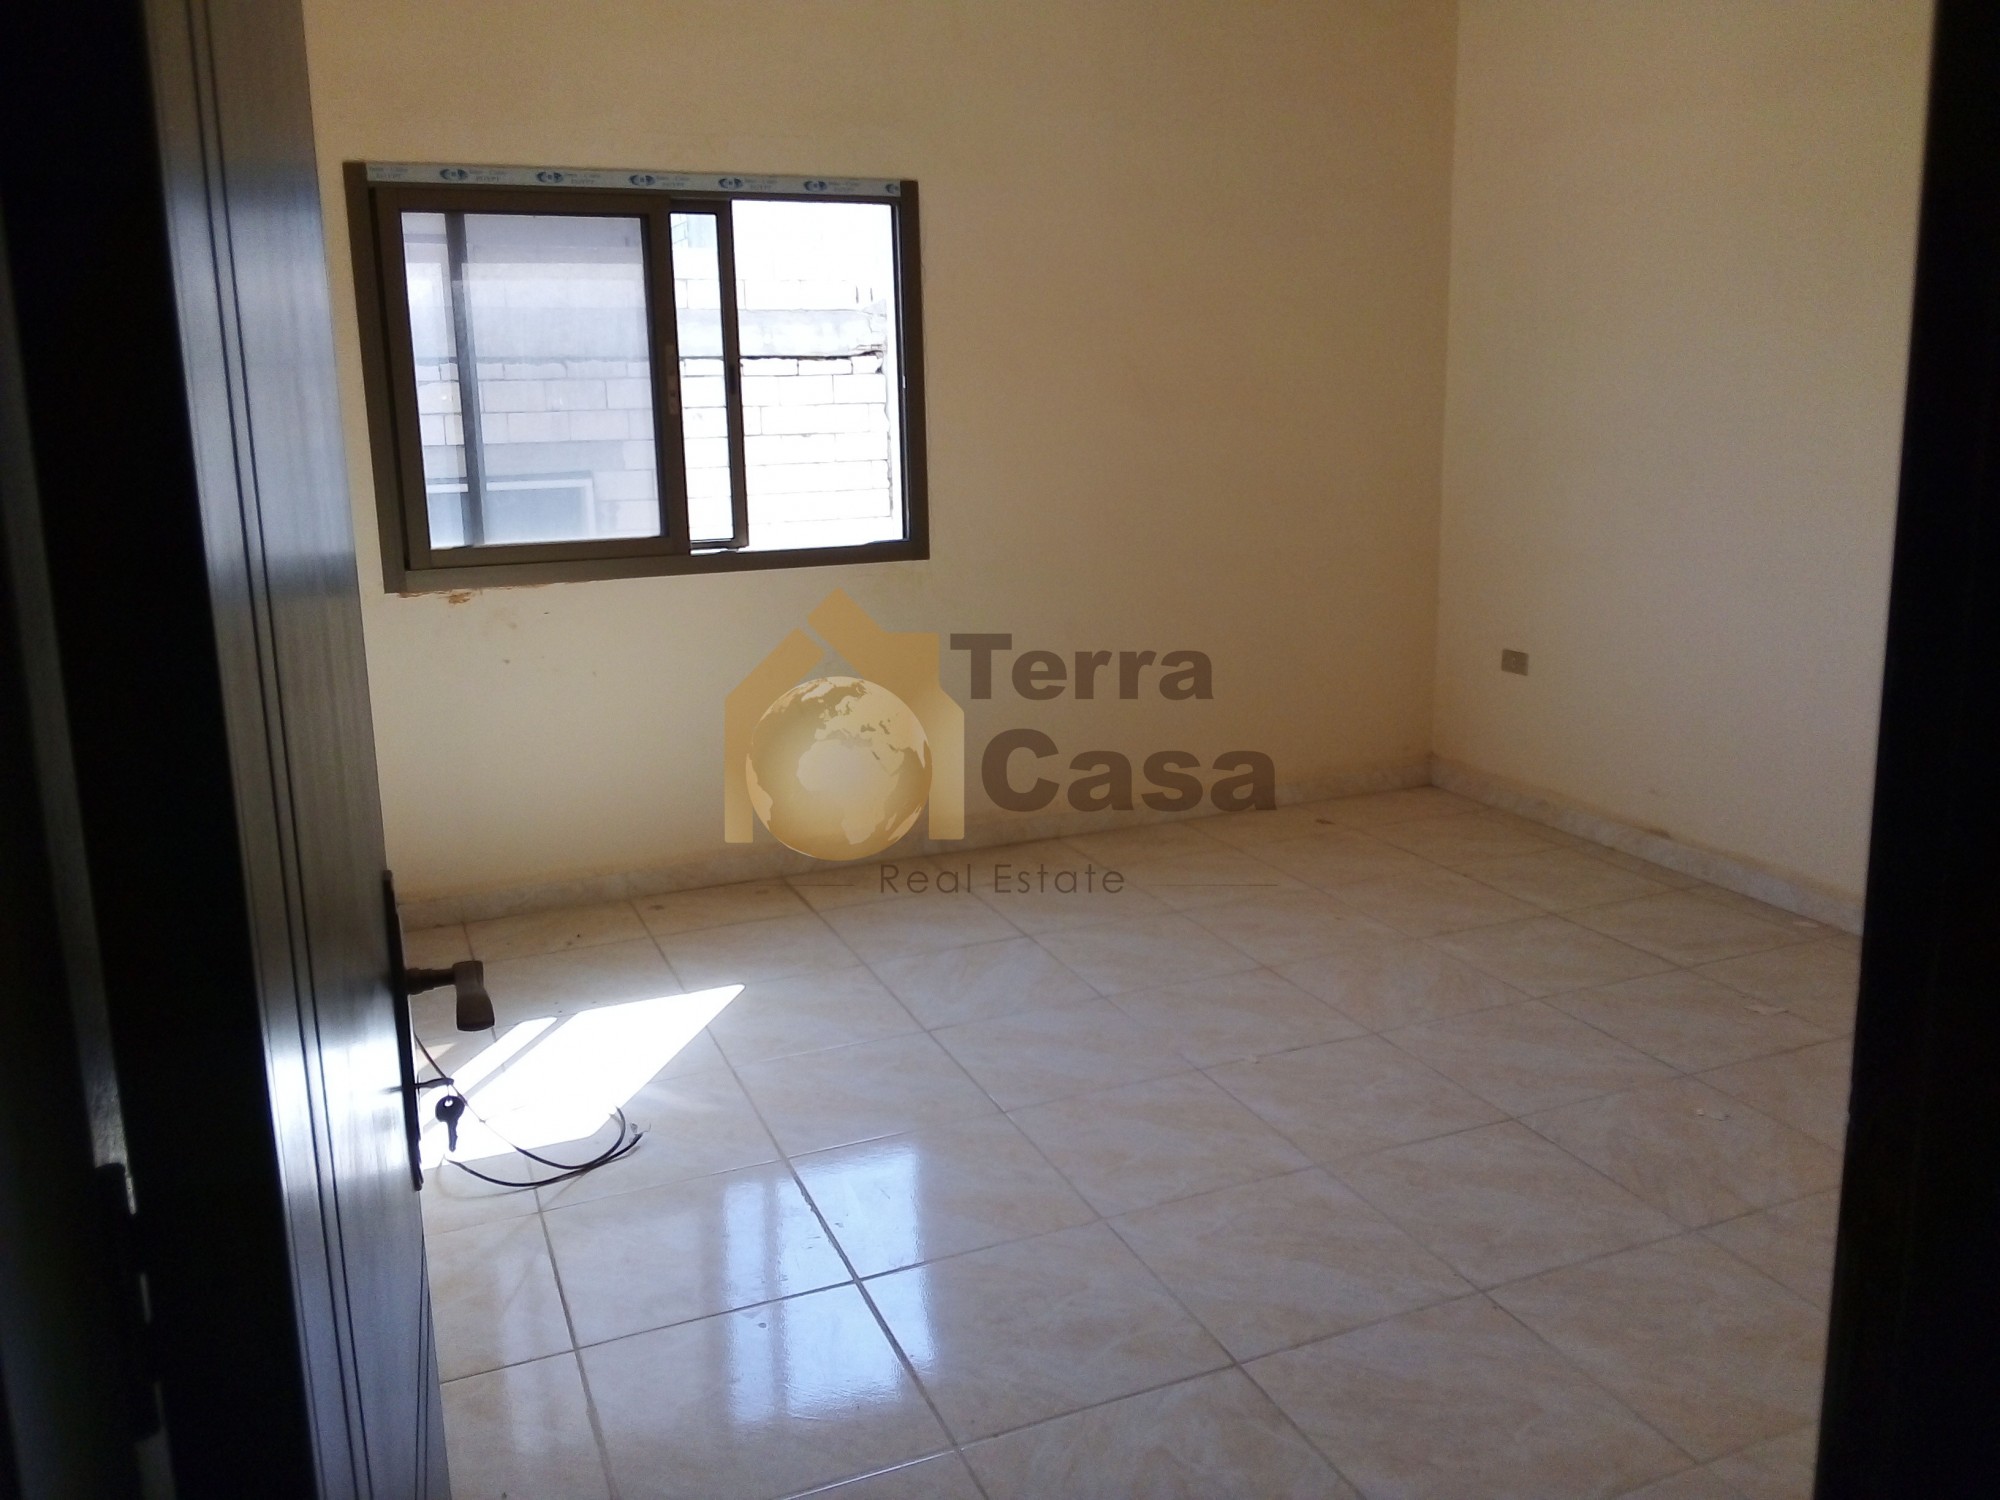 Apartment for rent in rayak main highway.